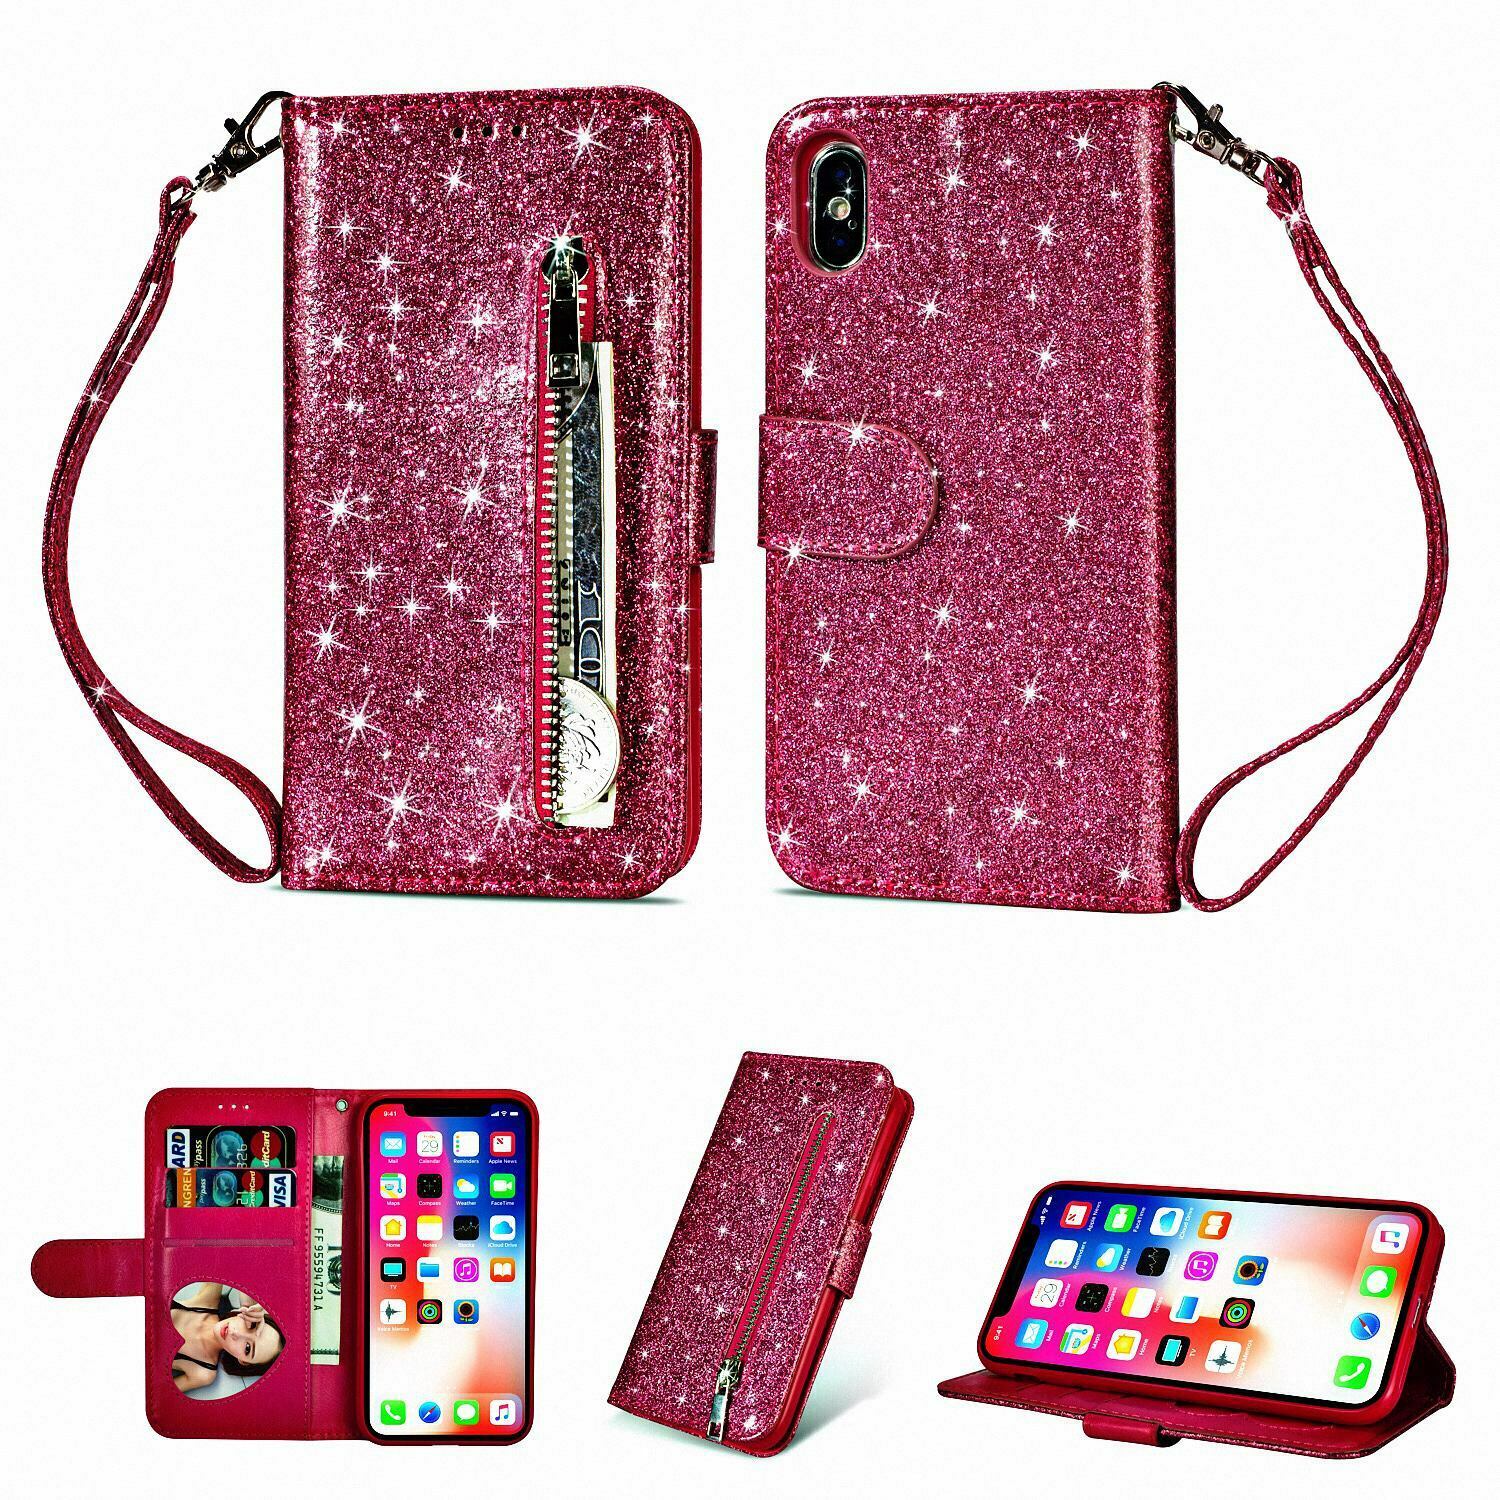 Glitter Bling Leather Zipper Wallet Case For iPhone